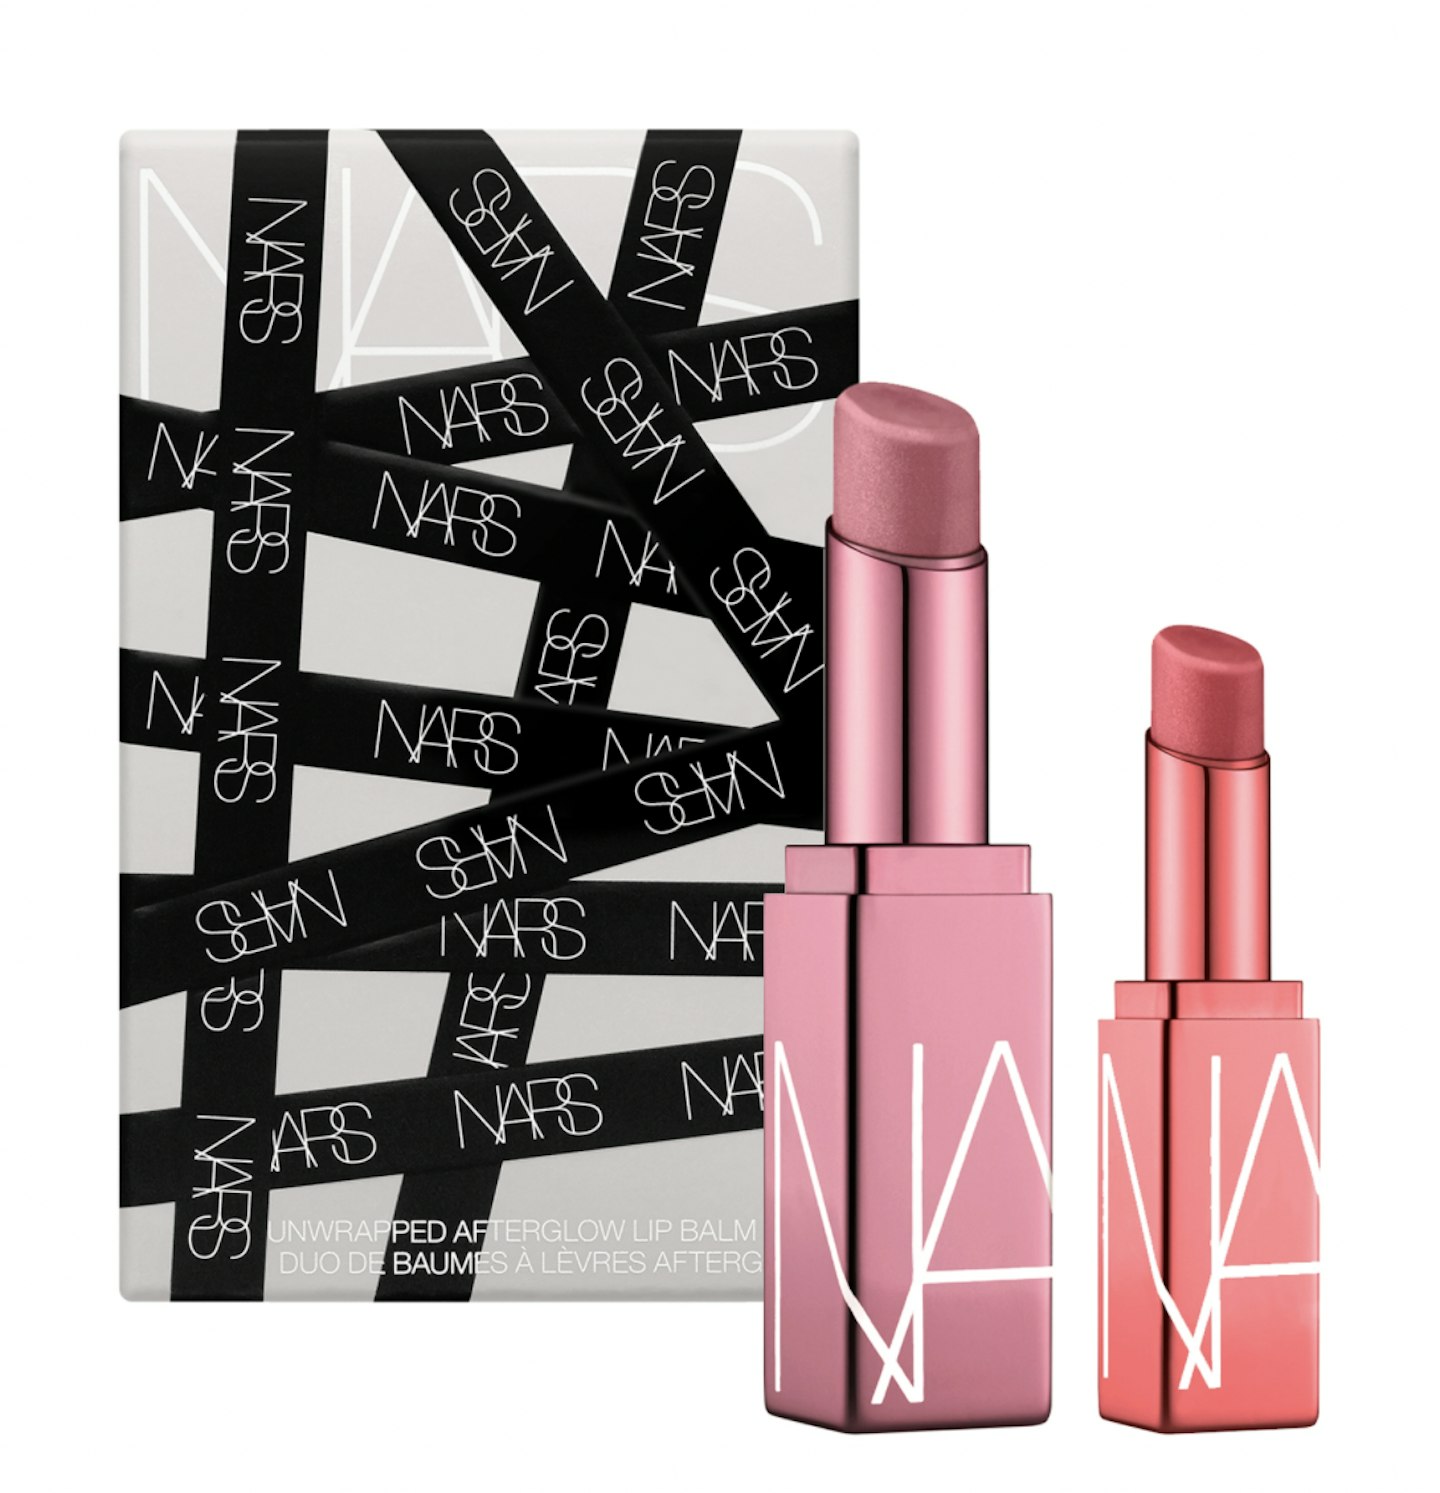 NARS Unwrapped Afterglow Lip Balm Duo